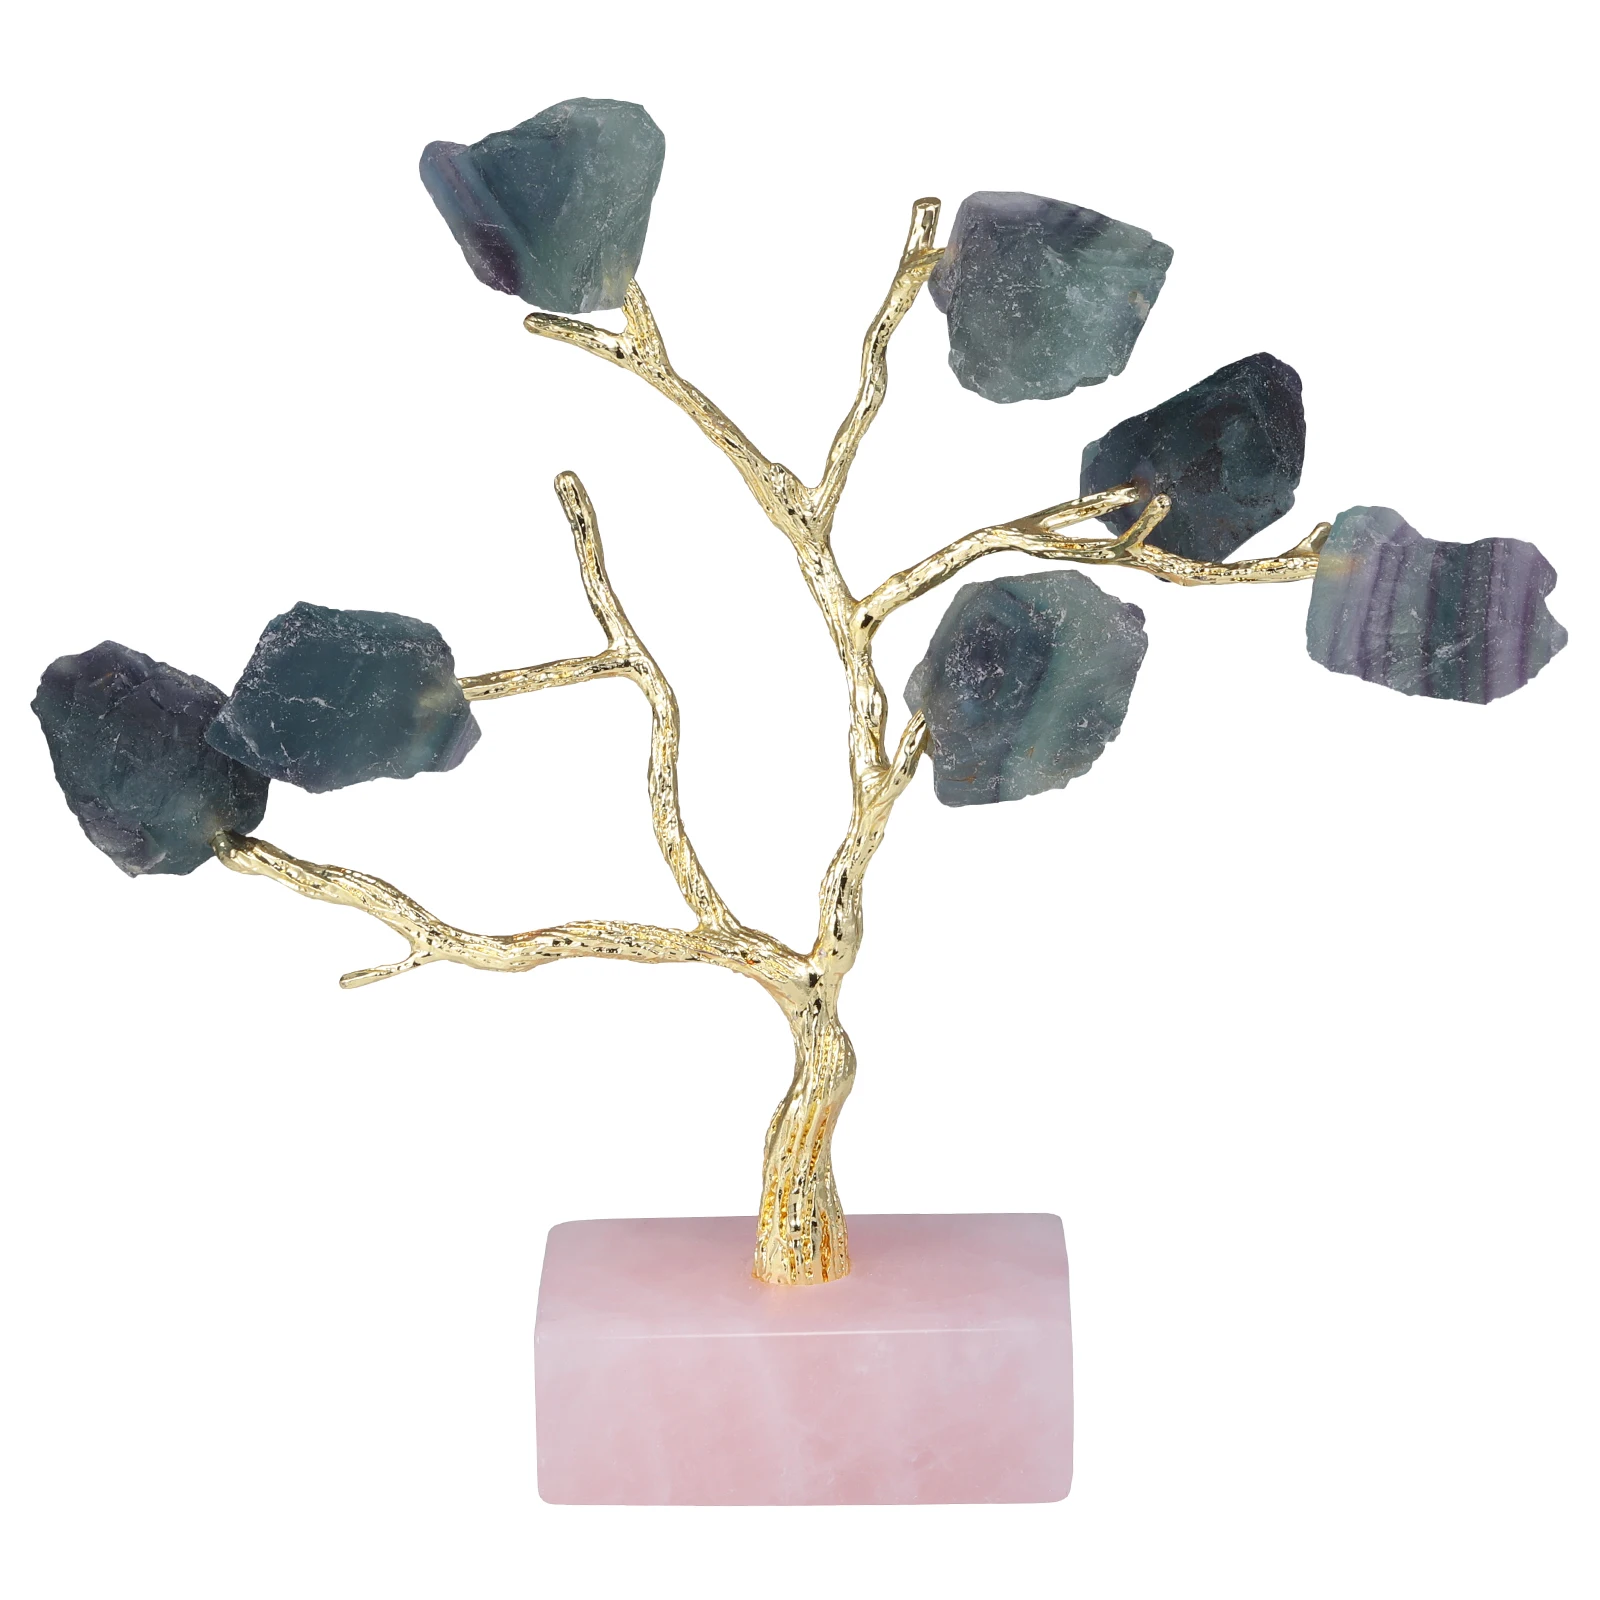 Natural Rough Crystal Stone Tree With Rose Quartz Base Healing Gemstone Golden Tree For Jewelry Organizer Home Table Decoration